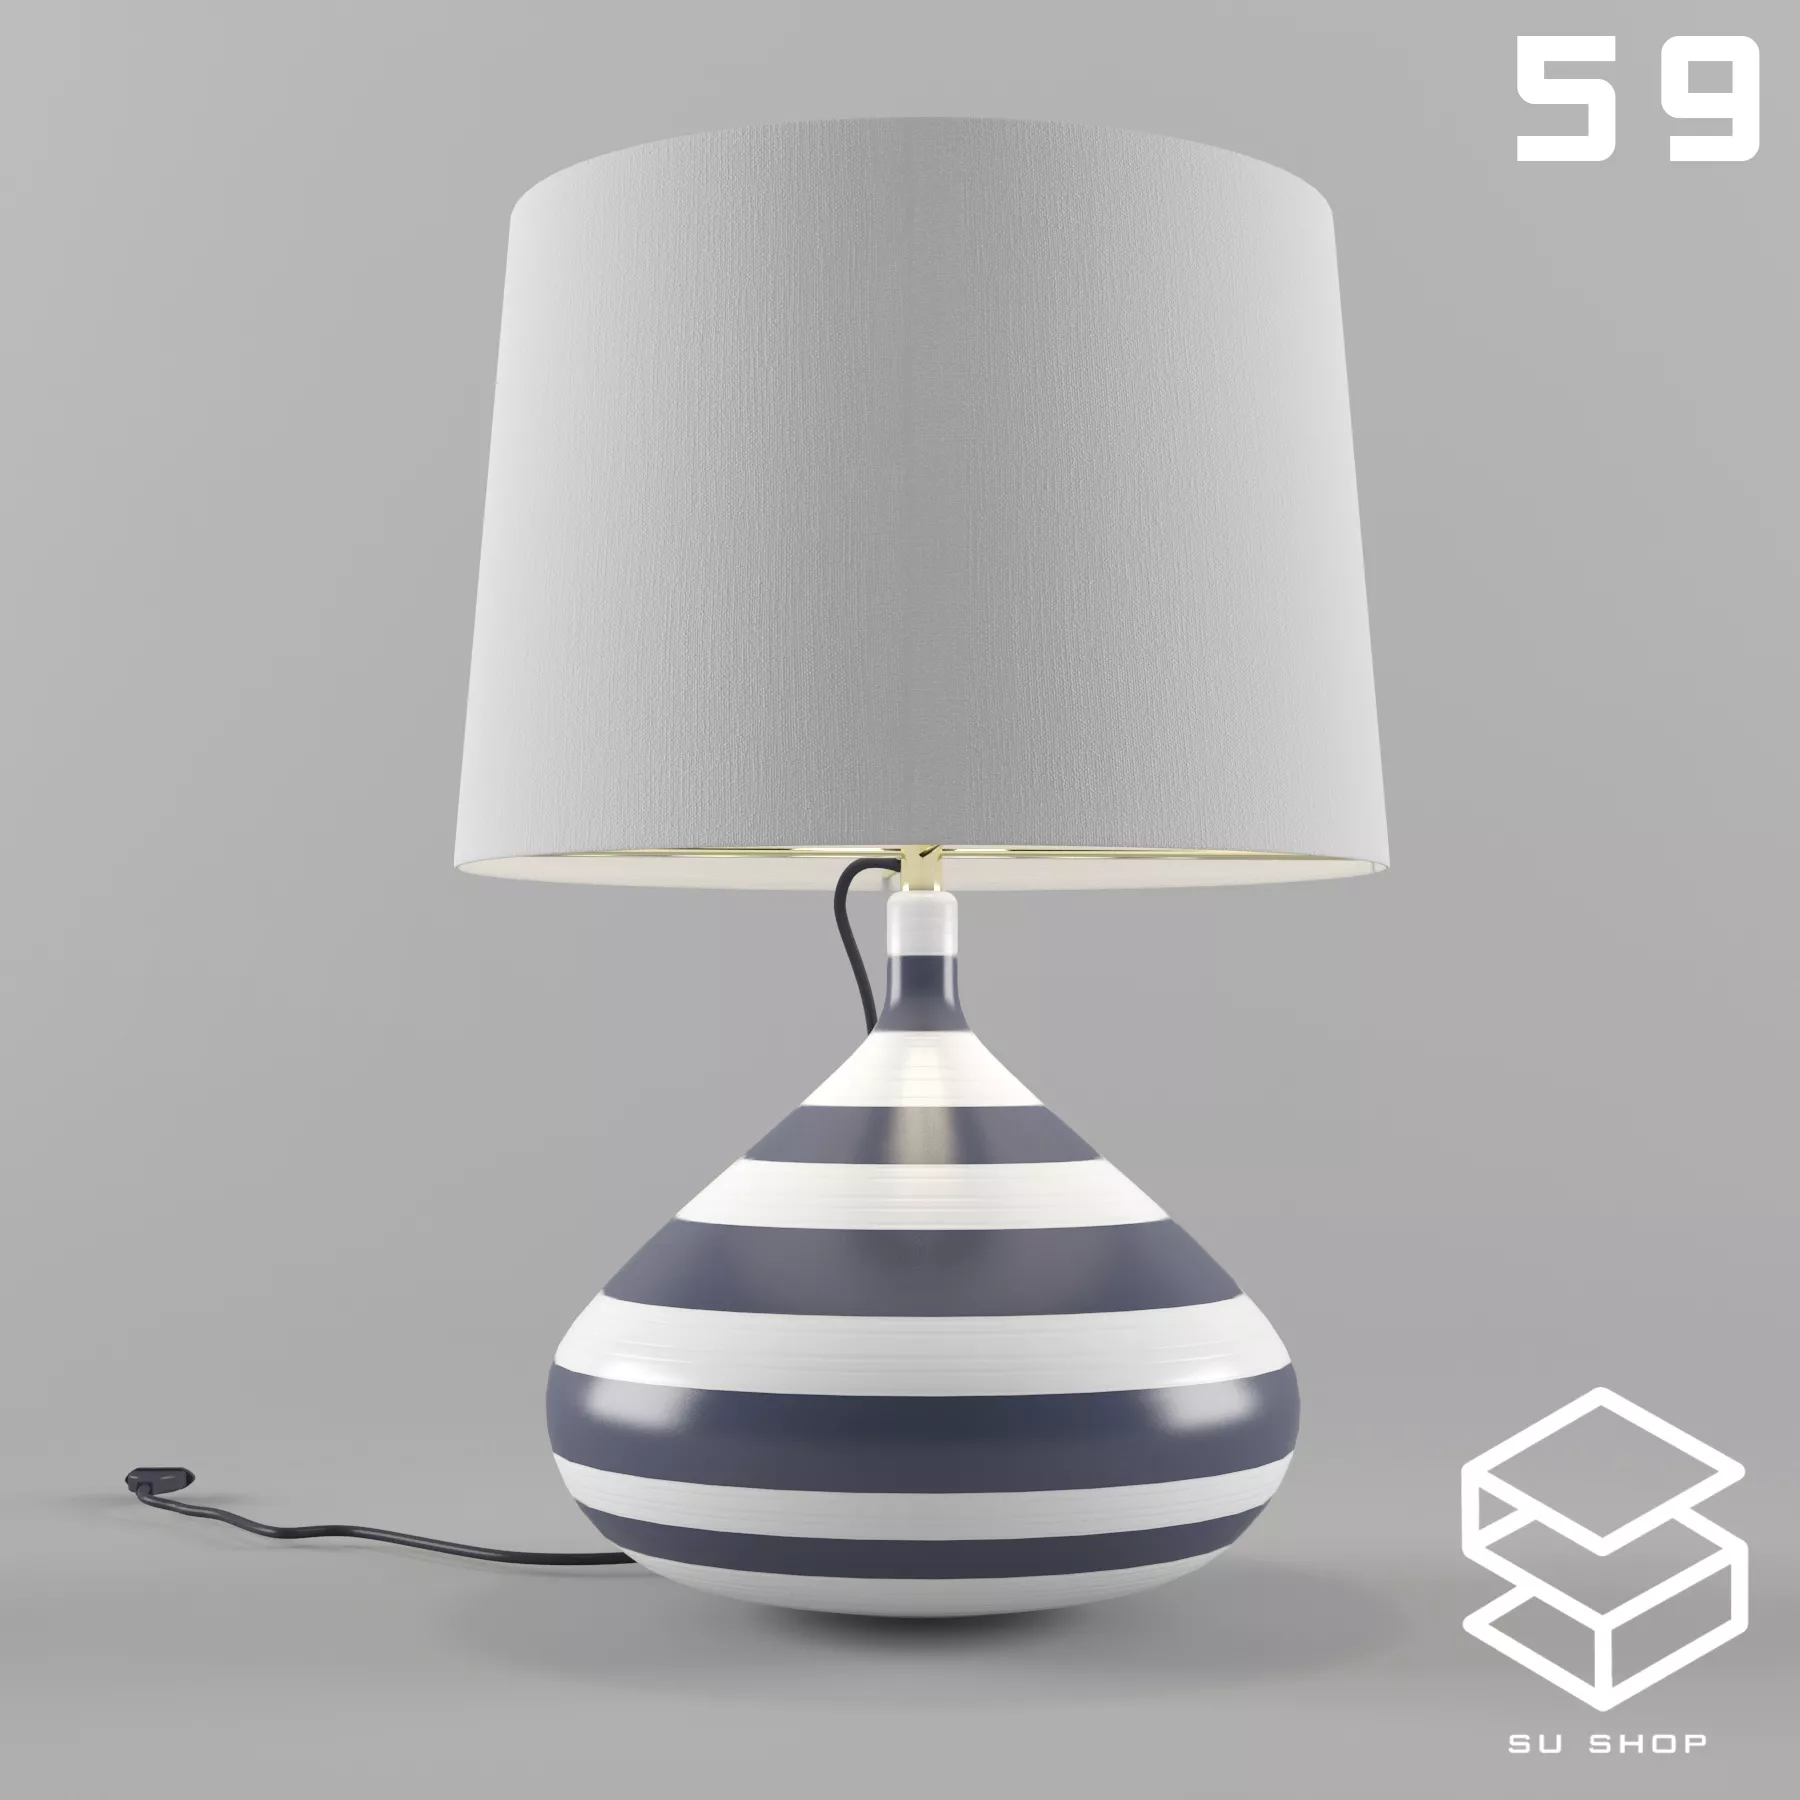 MODERN TABLE LAMP - SKETCHUP 3D MODEL - VRAY OR ENSCAPE - ID14854